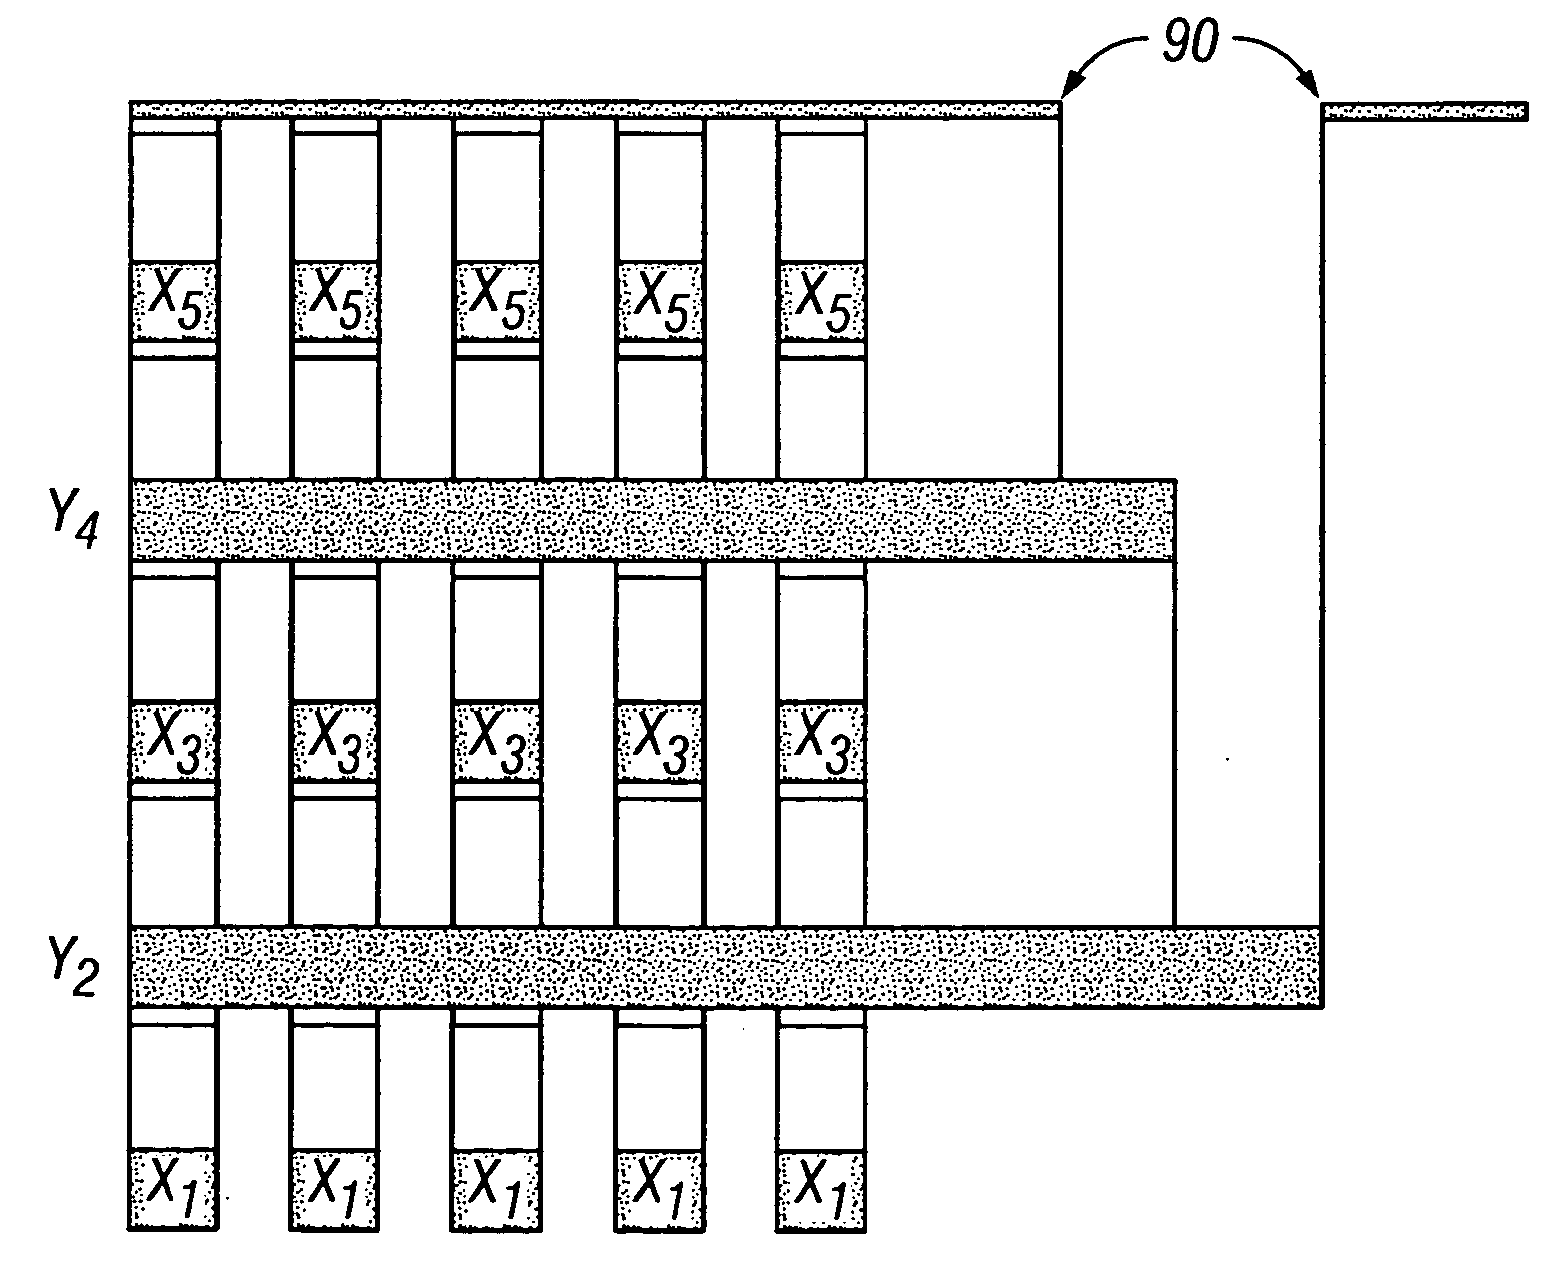 Contacts for an improved high-density nonvolatile memory